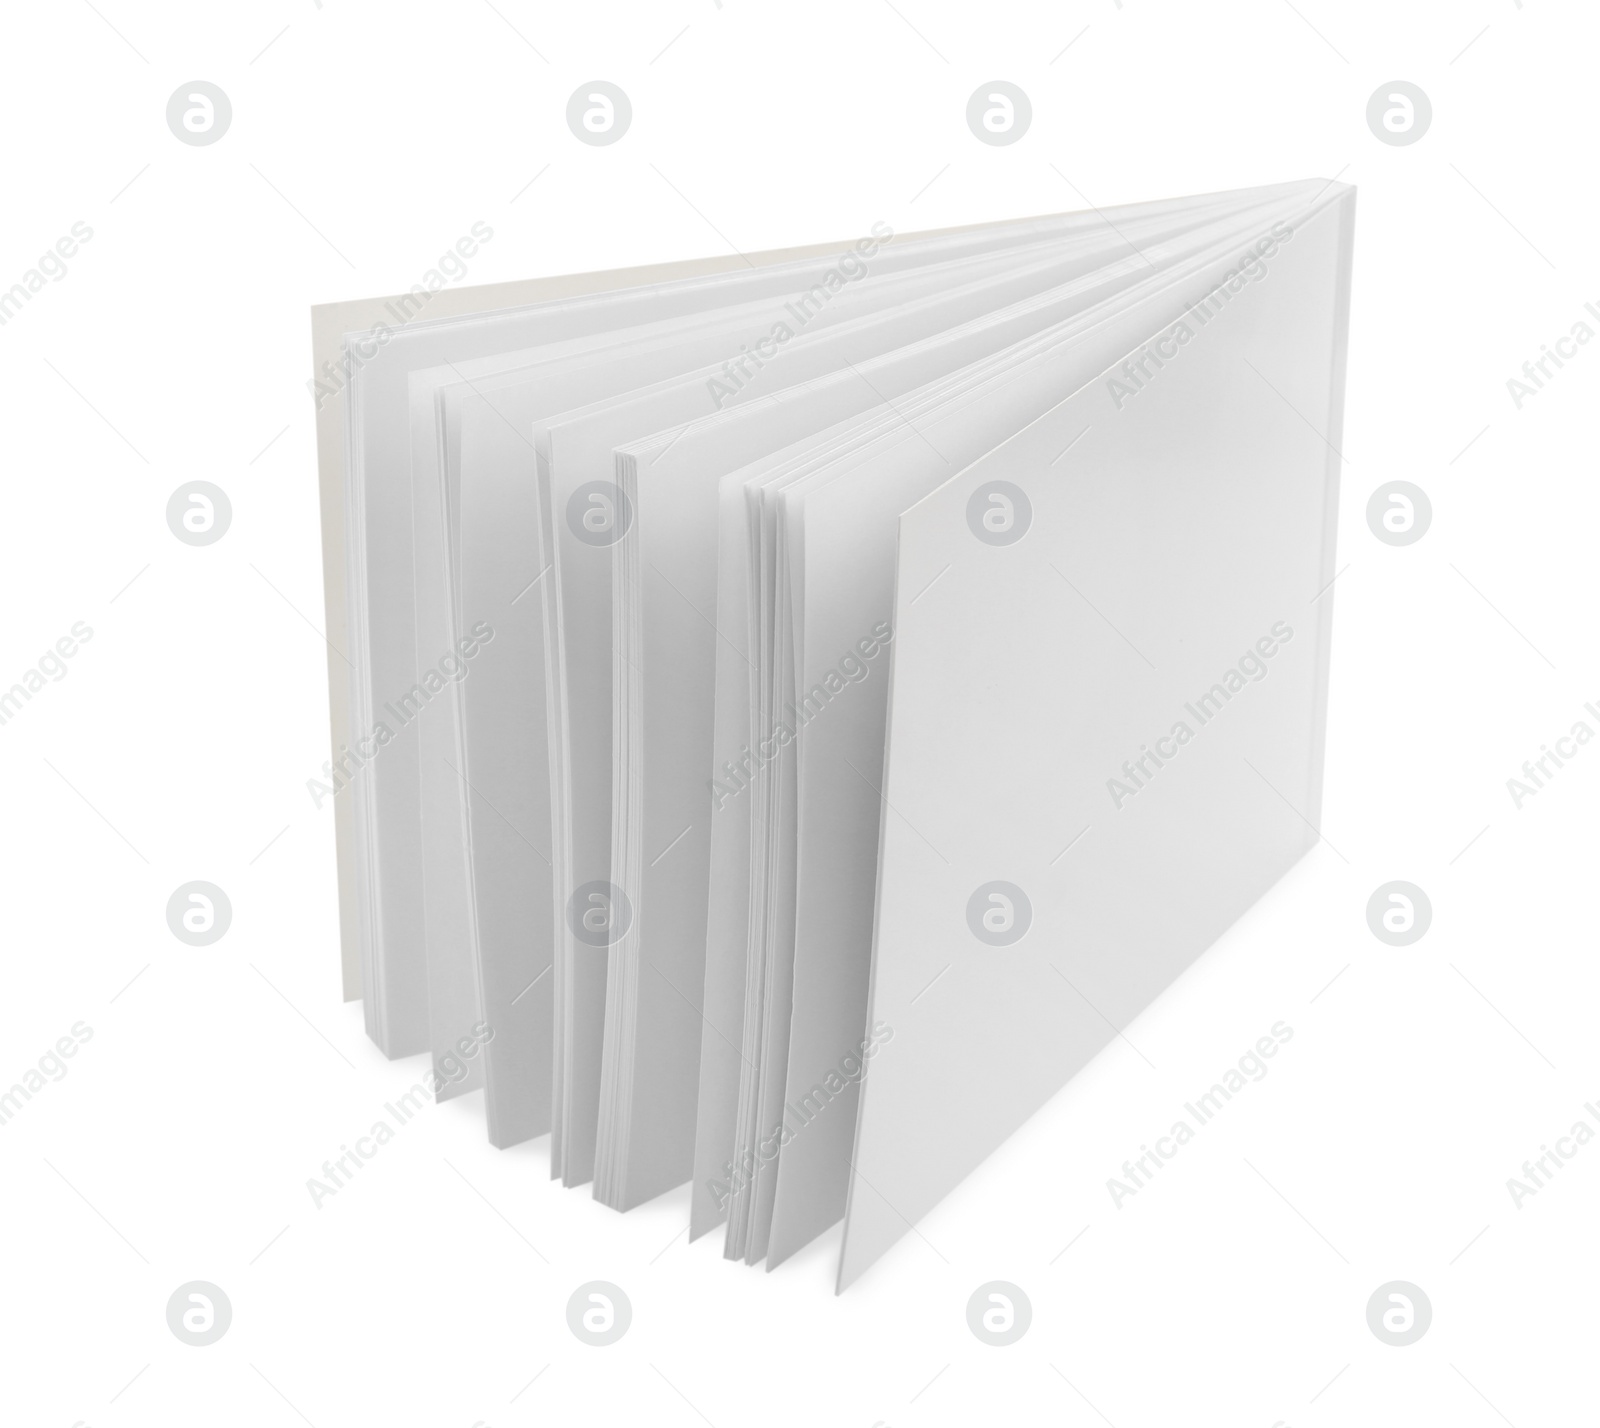 Photo of Paper brochure with blank cover isolated on white